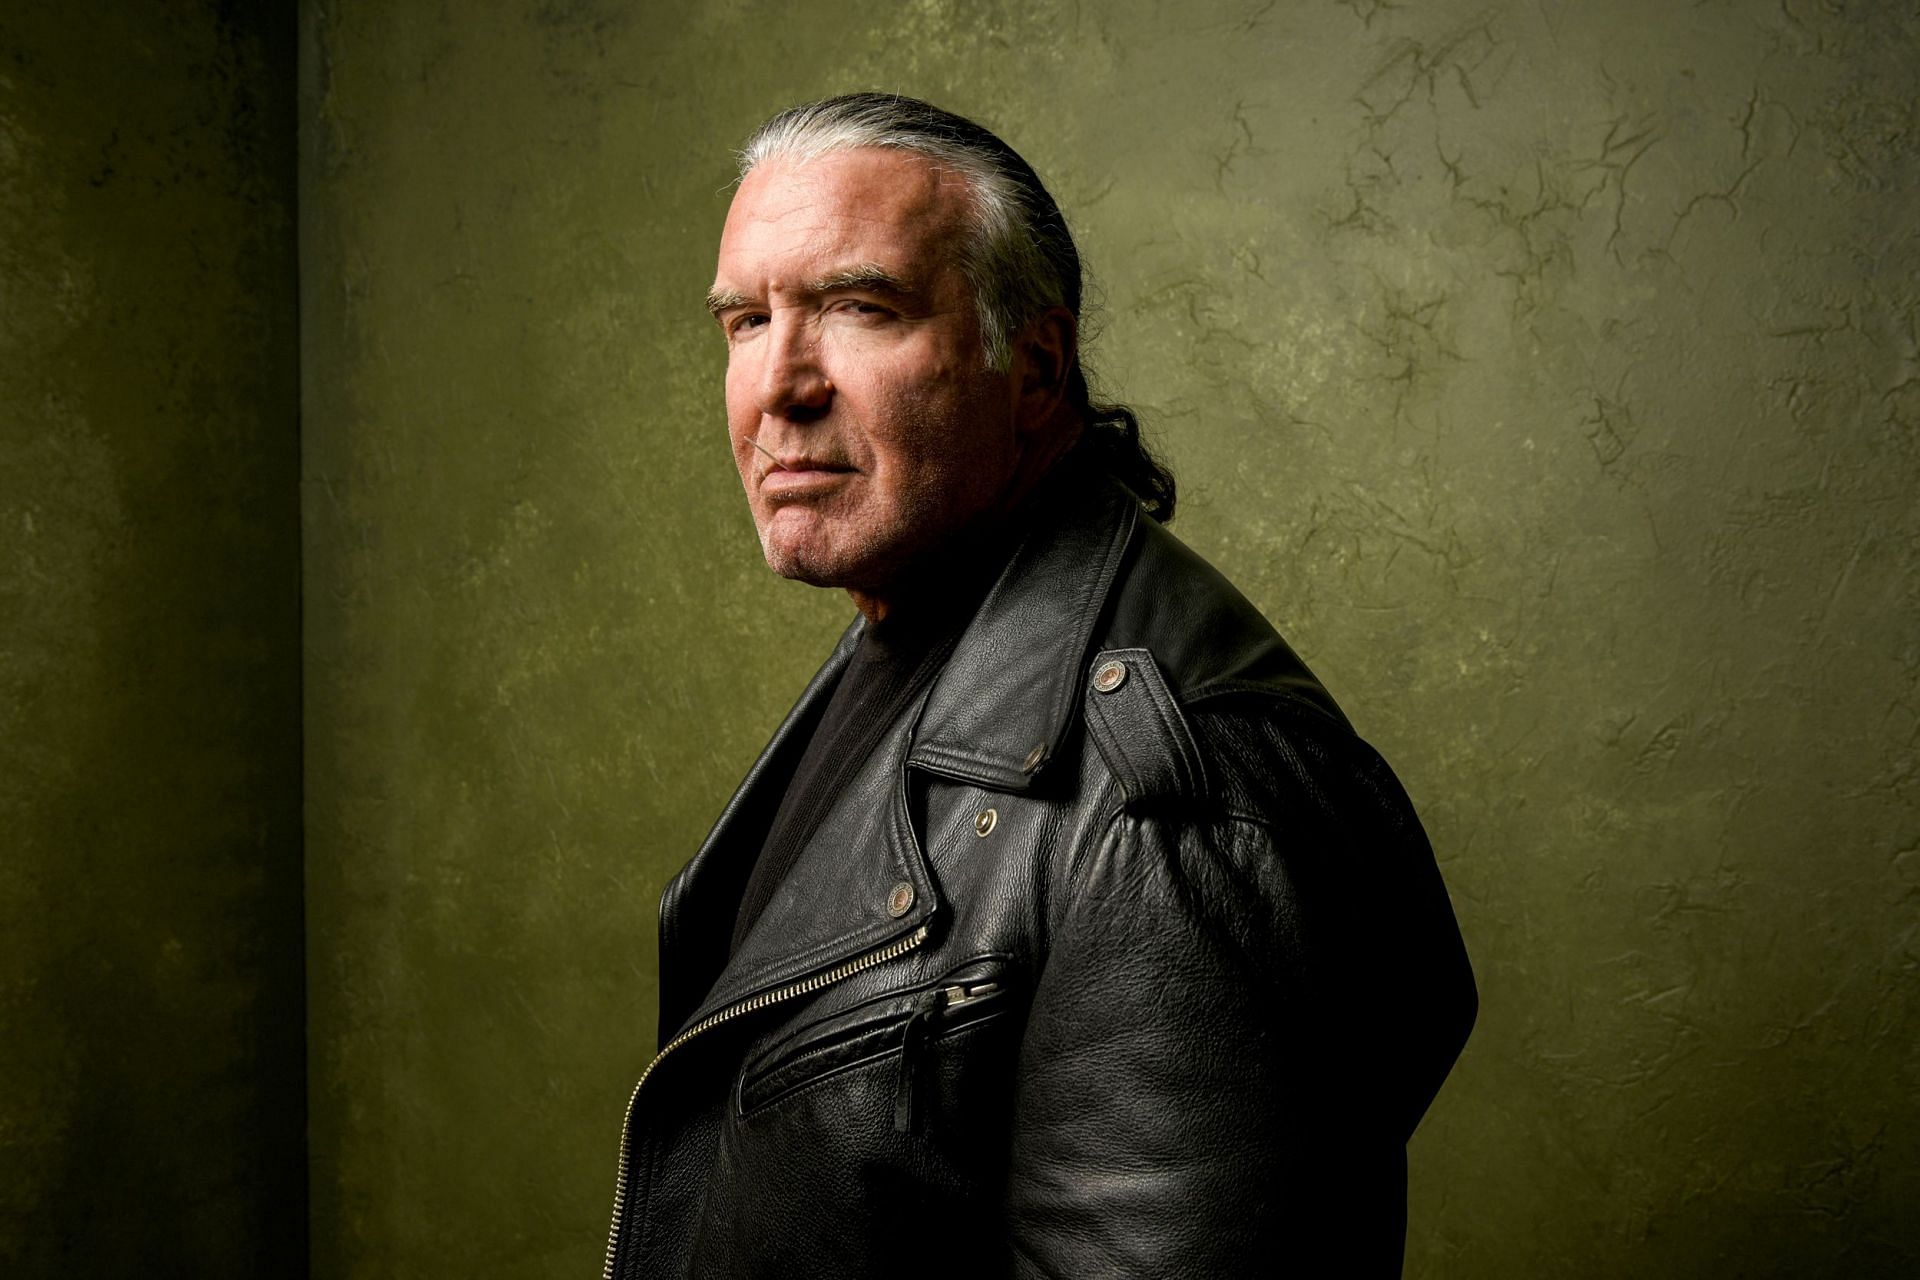 Scott Hall&#039;s passing leaves a gaping hole in the hearts of the wrestling fraternity